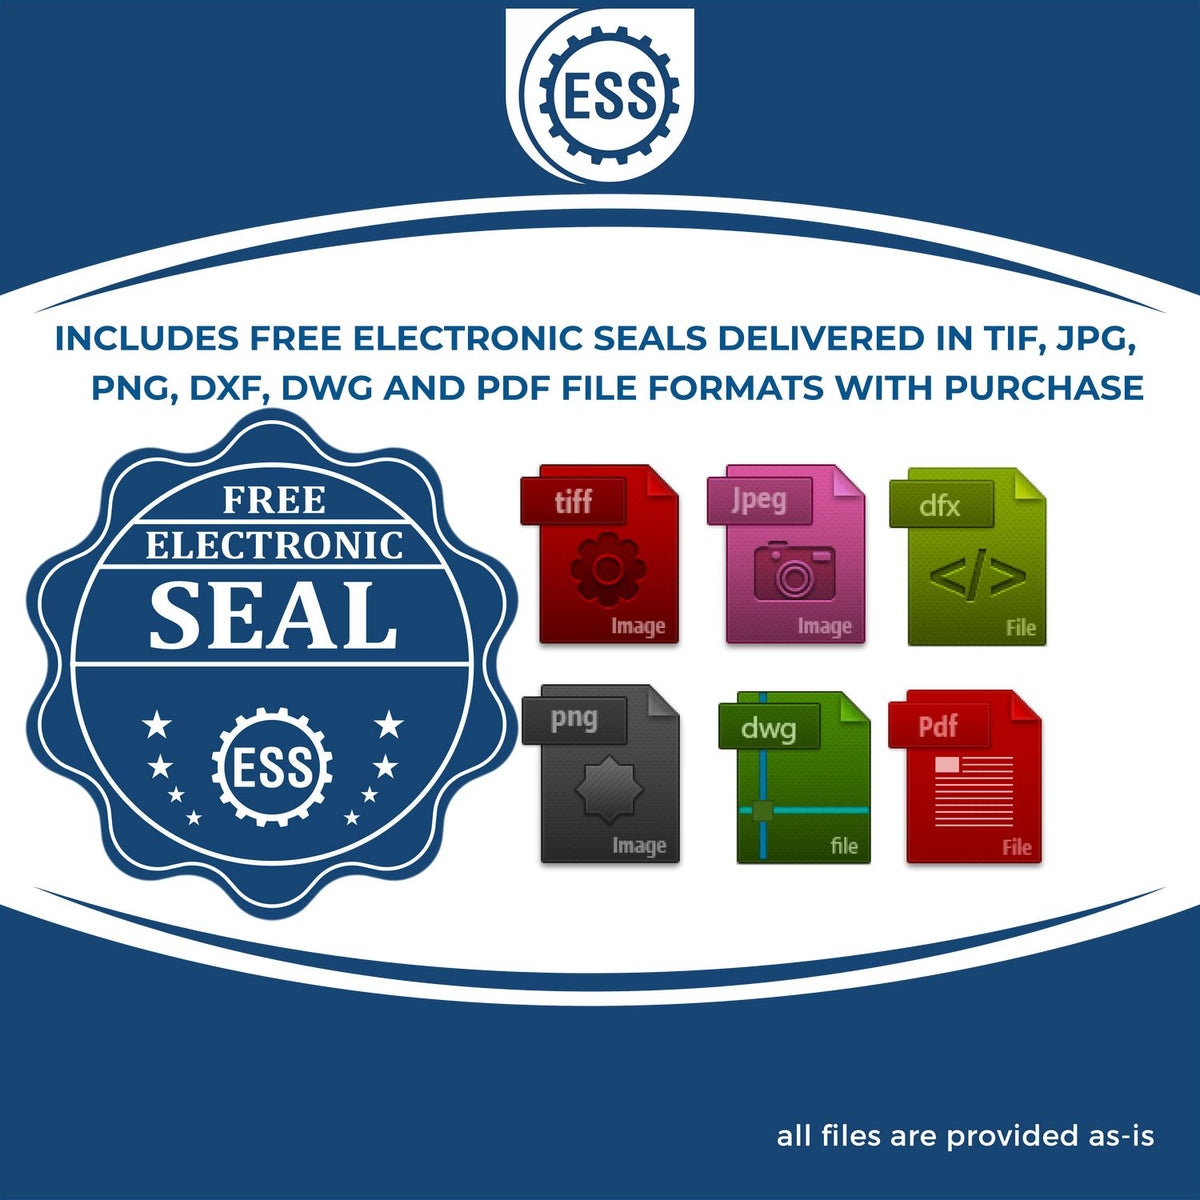 An infographic for the free electronic seal for the Slim Pre-Inked New York Landscape Architect Seal Stamp illustrating the different file type icons such as DXF, DWG, TIF, JPG and PNG.